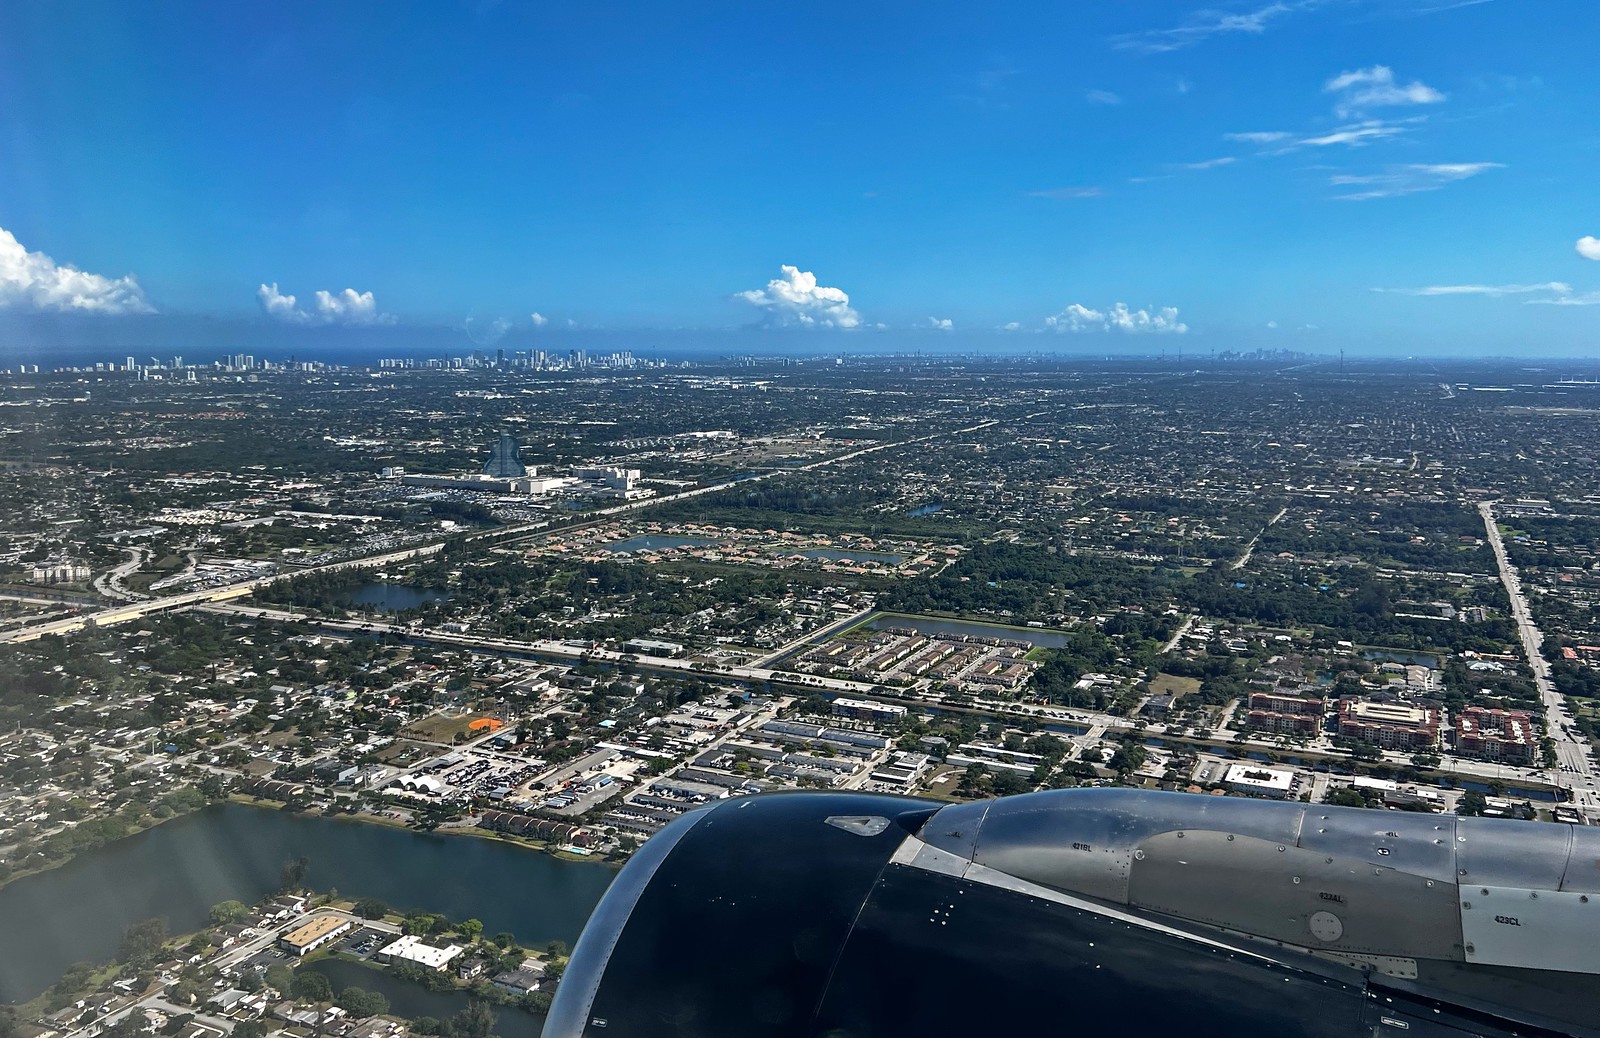 Miami skyline in the distance while on final approach